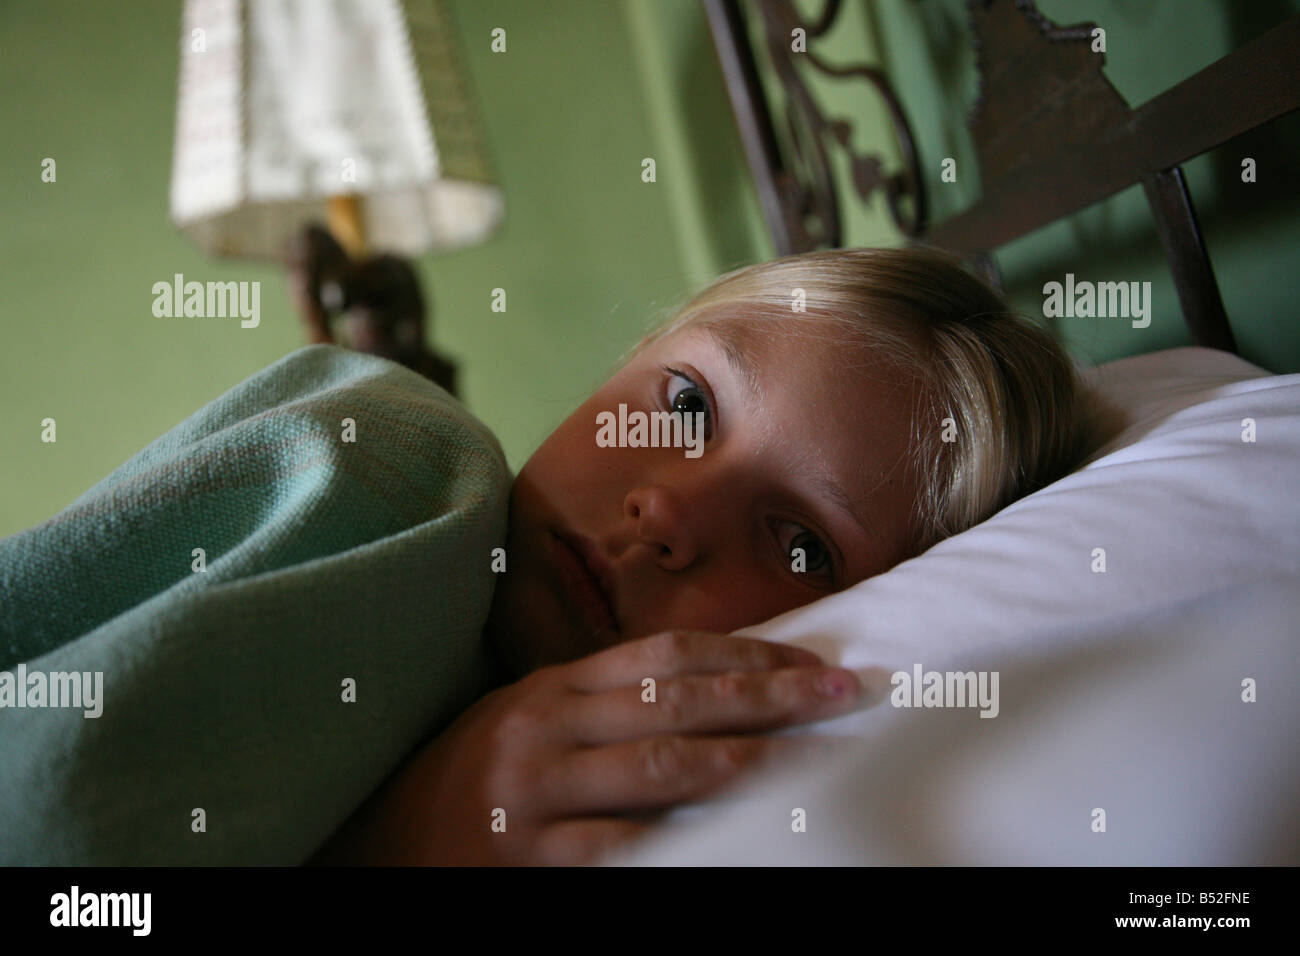 Eight year old girl lying down while recovering from stomach upset while traveling abroad Stock Photo